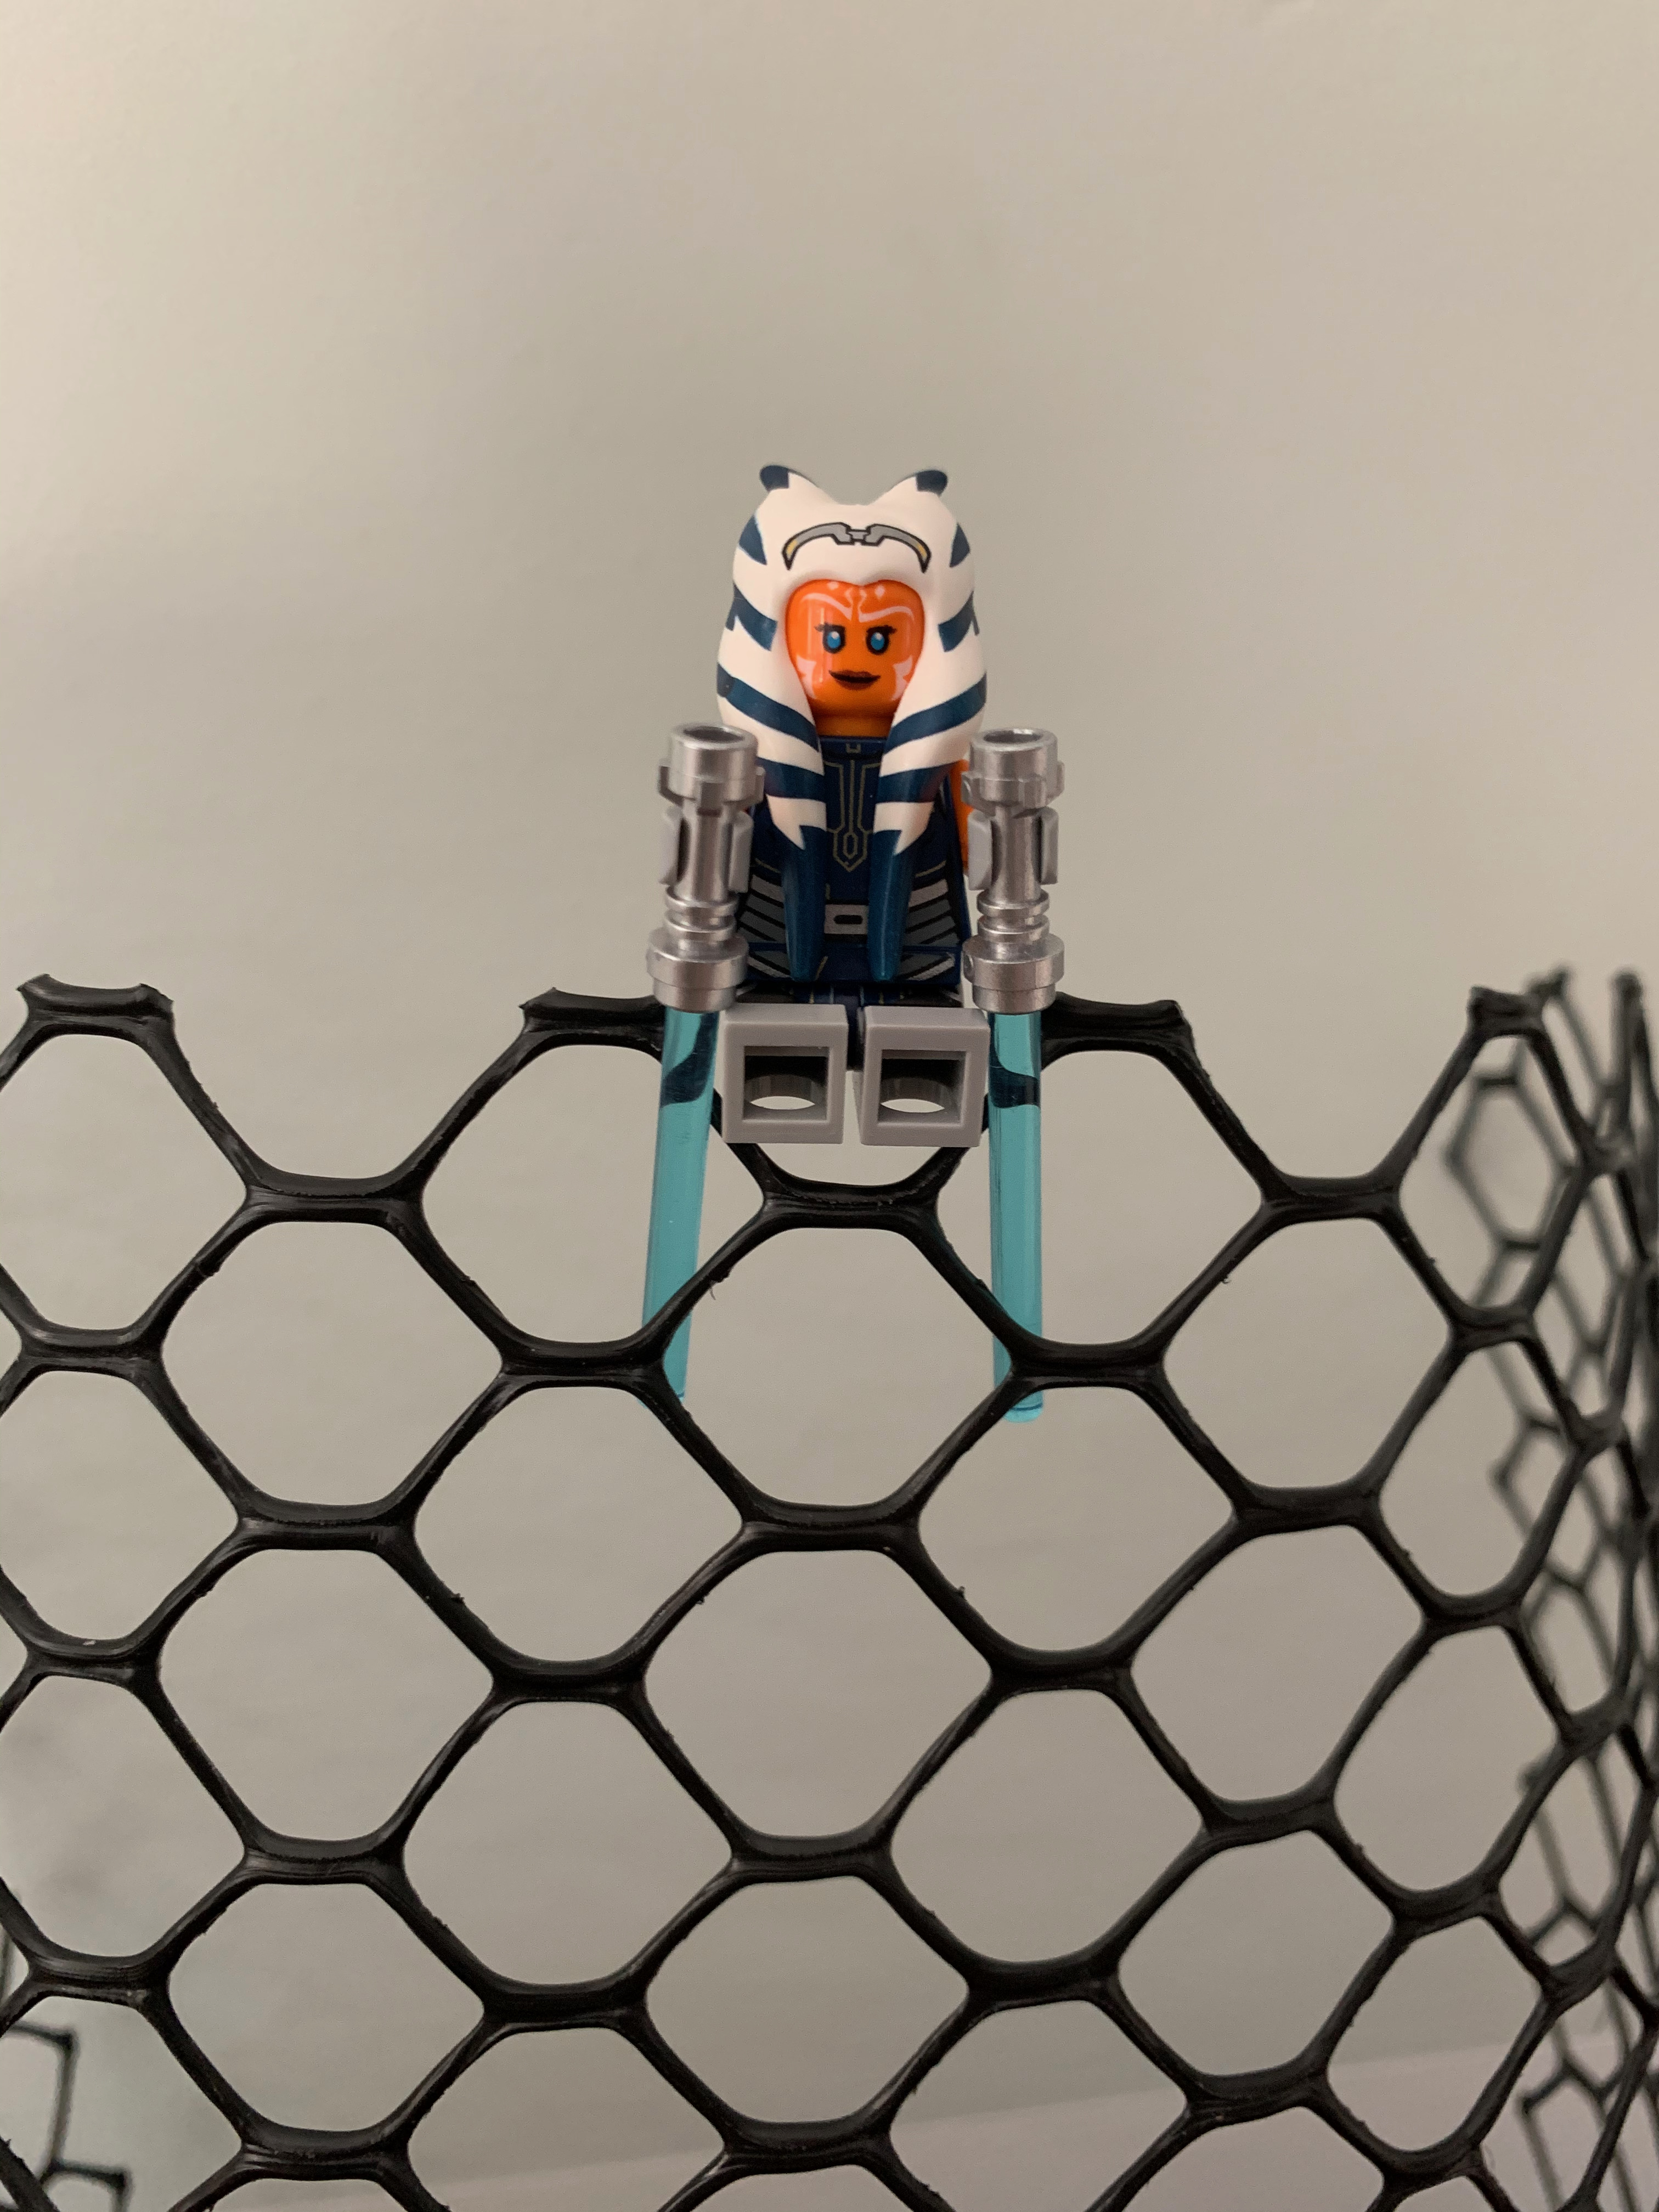 Armchair wrap. Here Ahsoka is demonstrating why it is called an armchair. The wrap is not complete here because it obscured the visual aspect of the armchair.